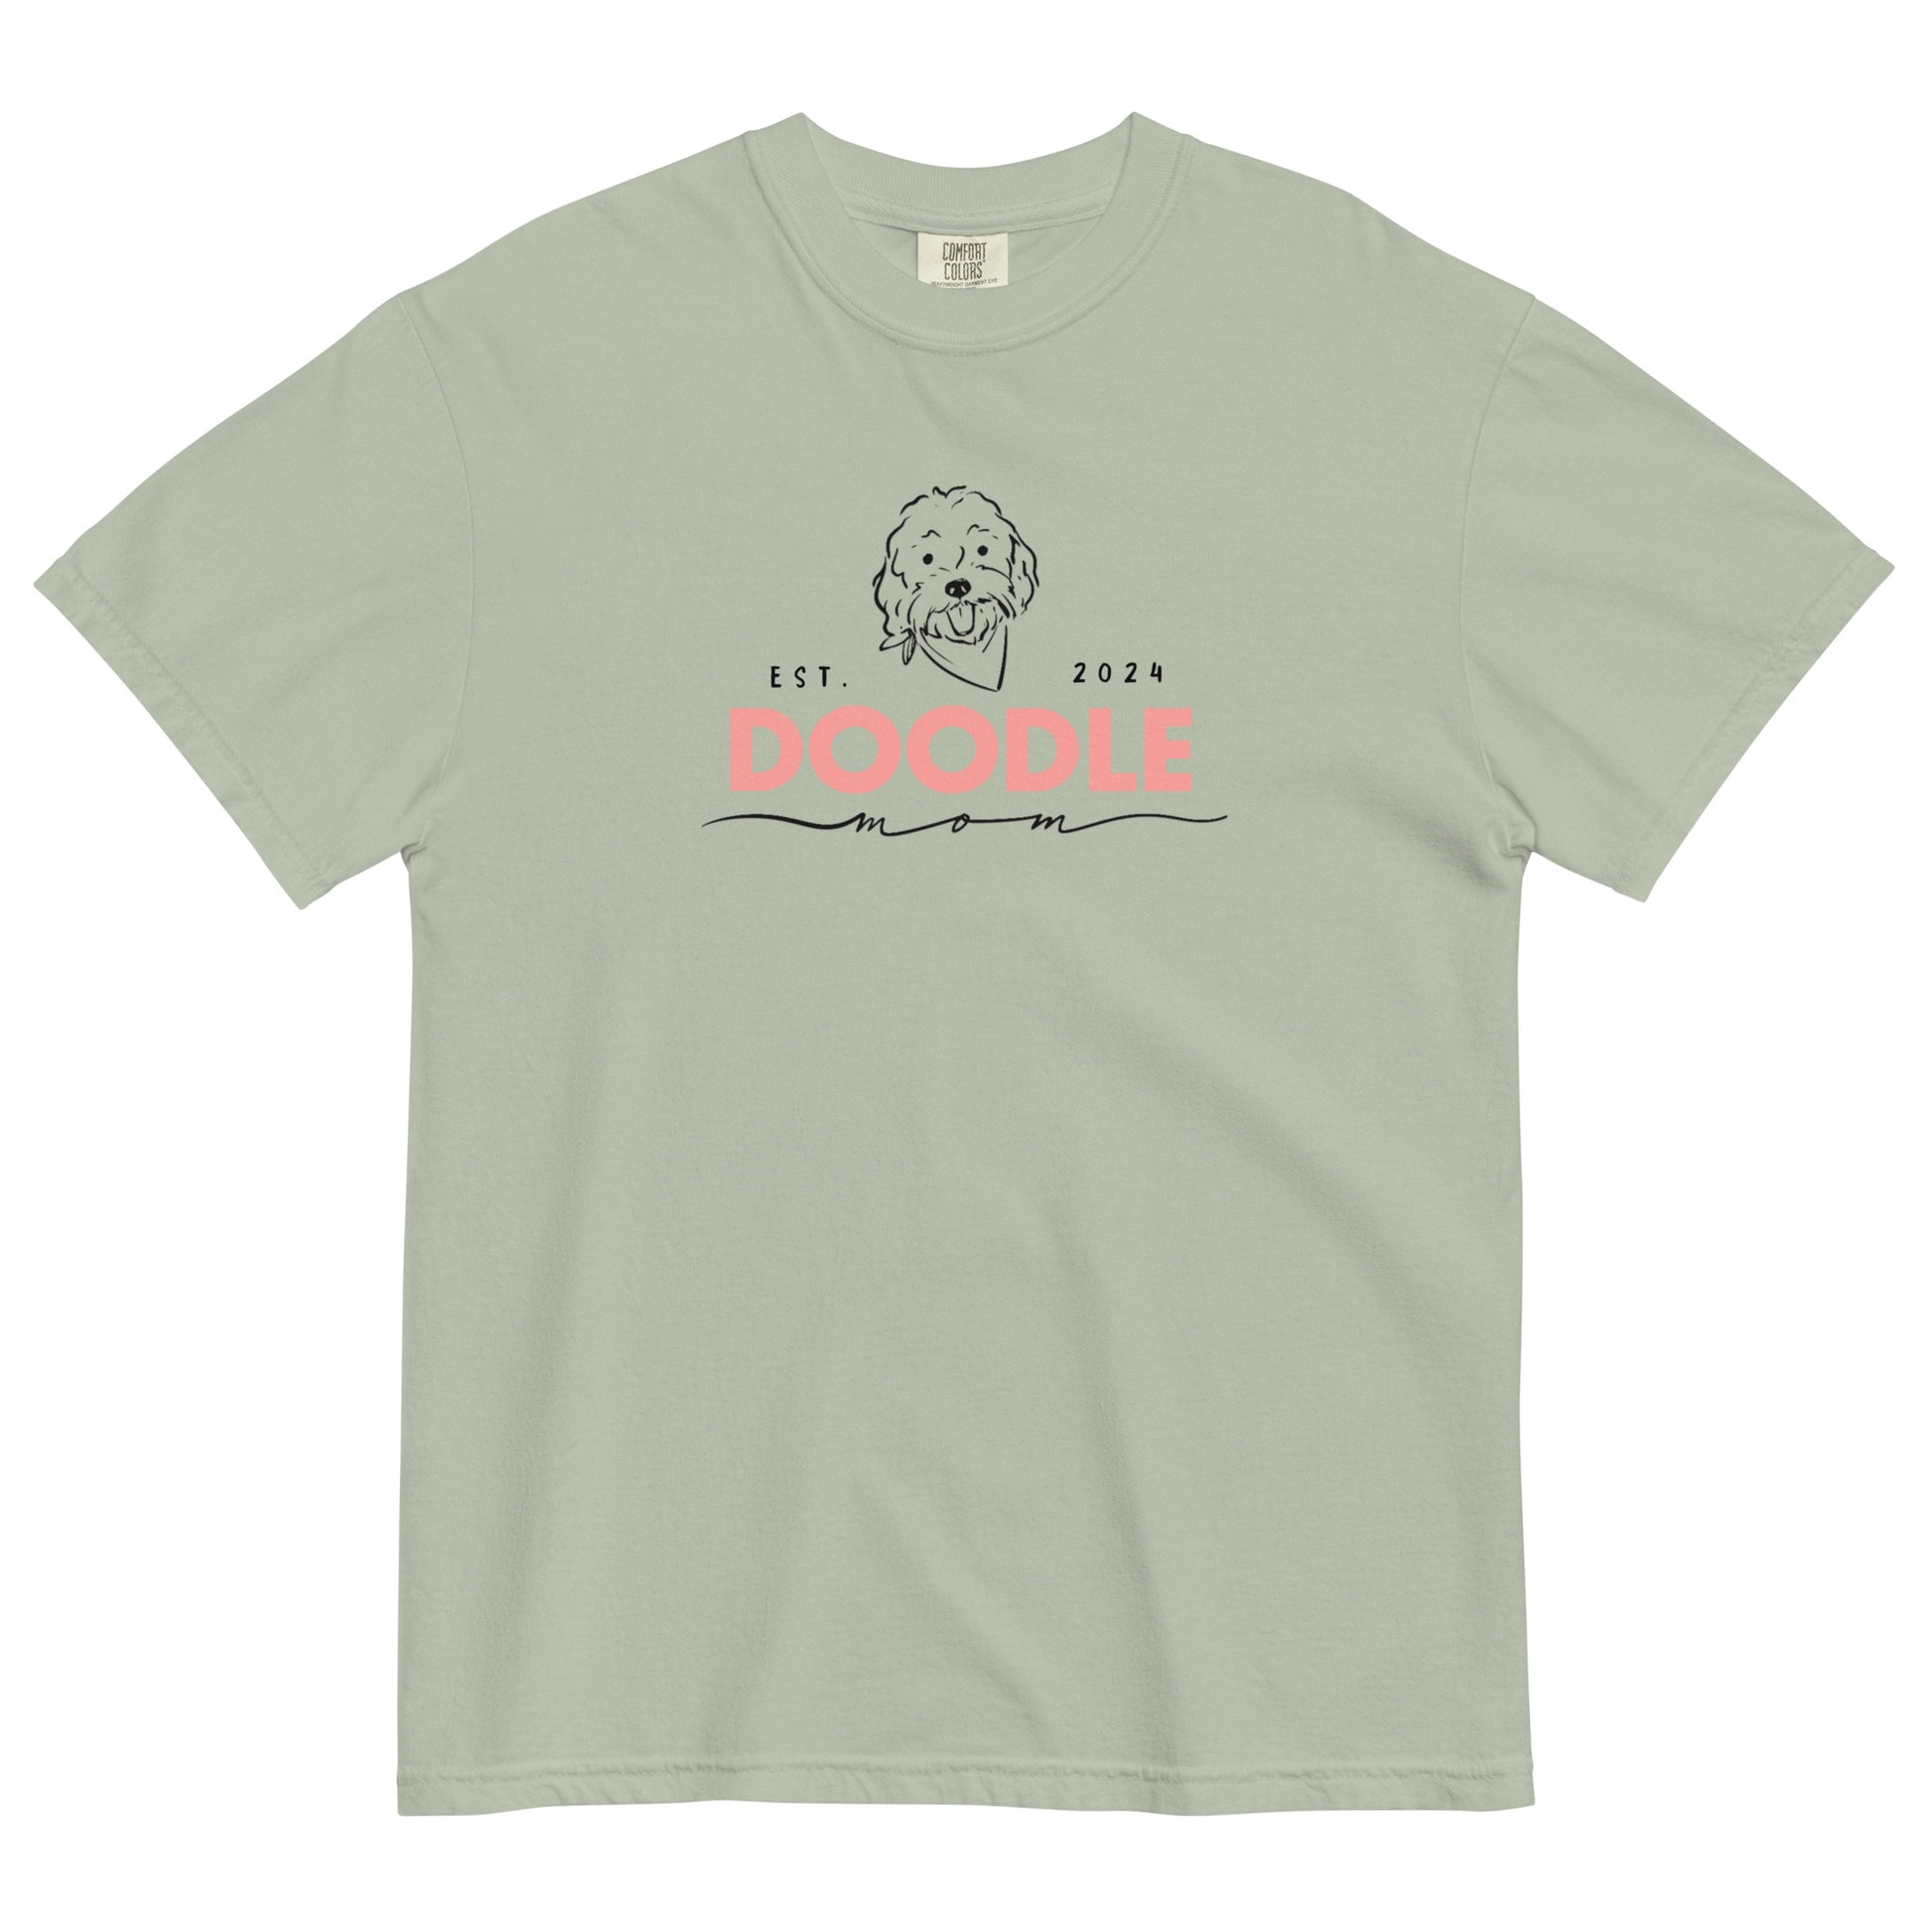 This Goldendoodle mom shirt features the message, "Doodle Mom Est. 2024" and a cute Doodle dog's face printed on the front. The tag inside the T-shirt says Comfort Colors